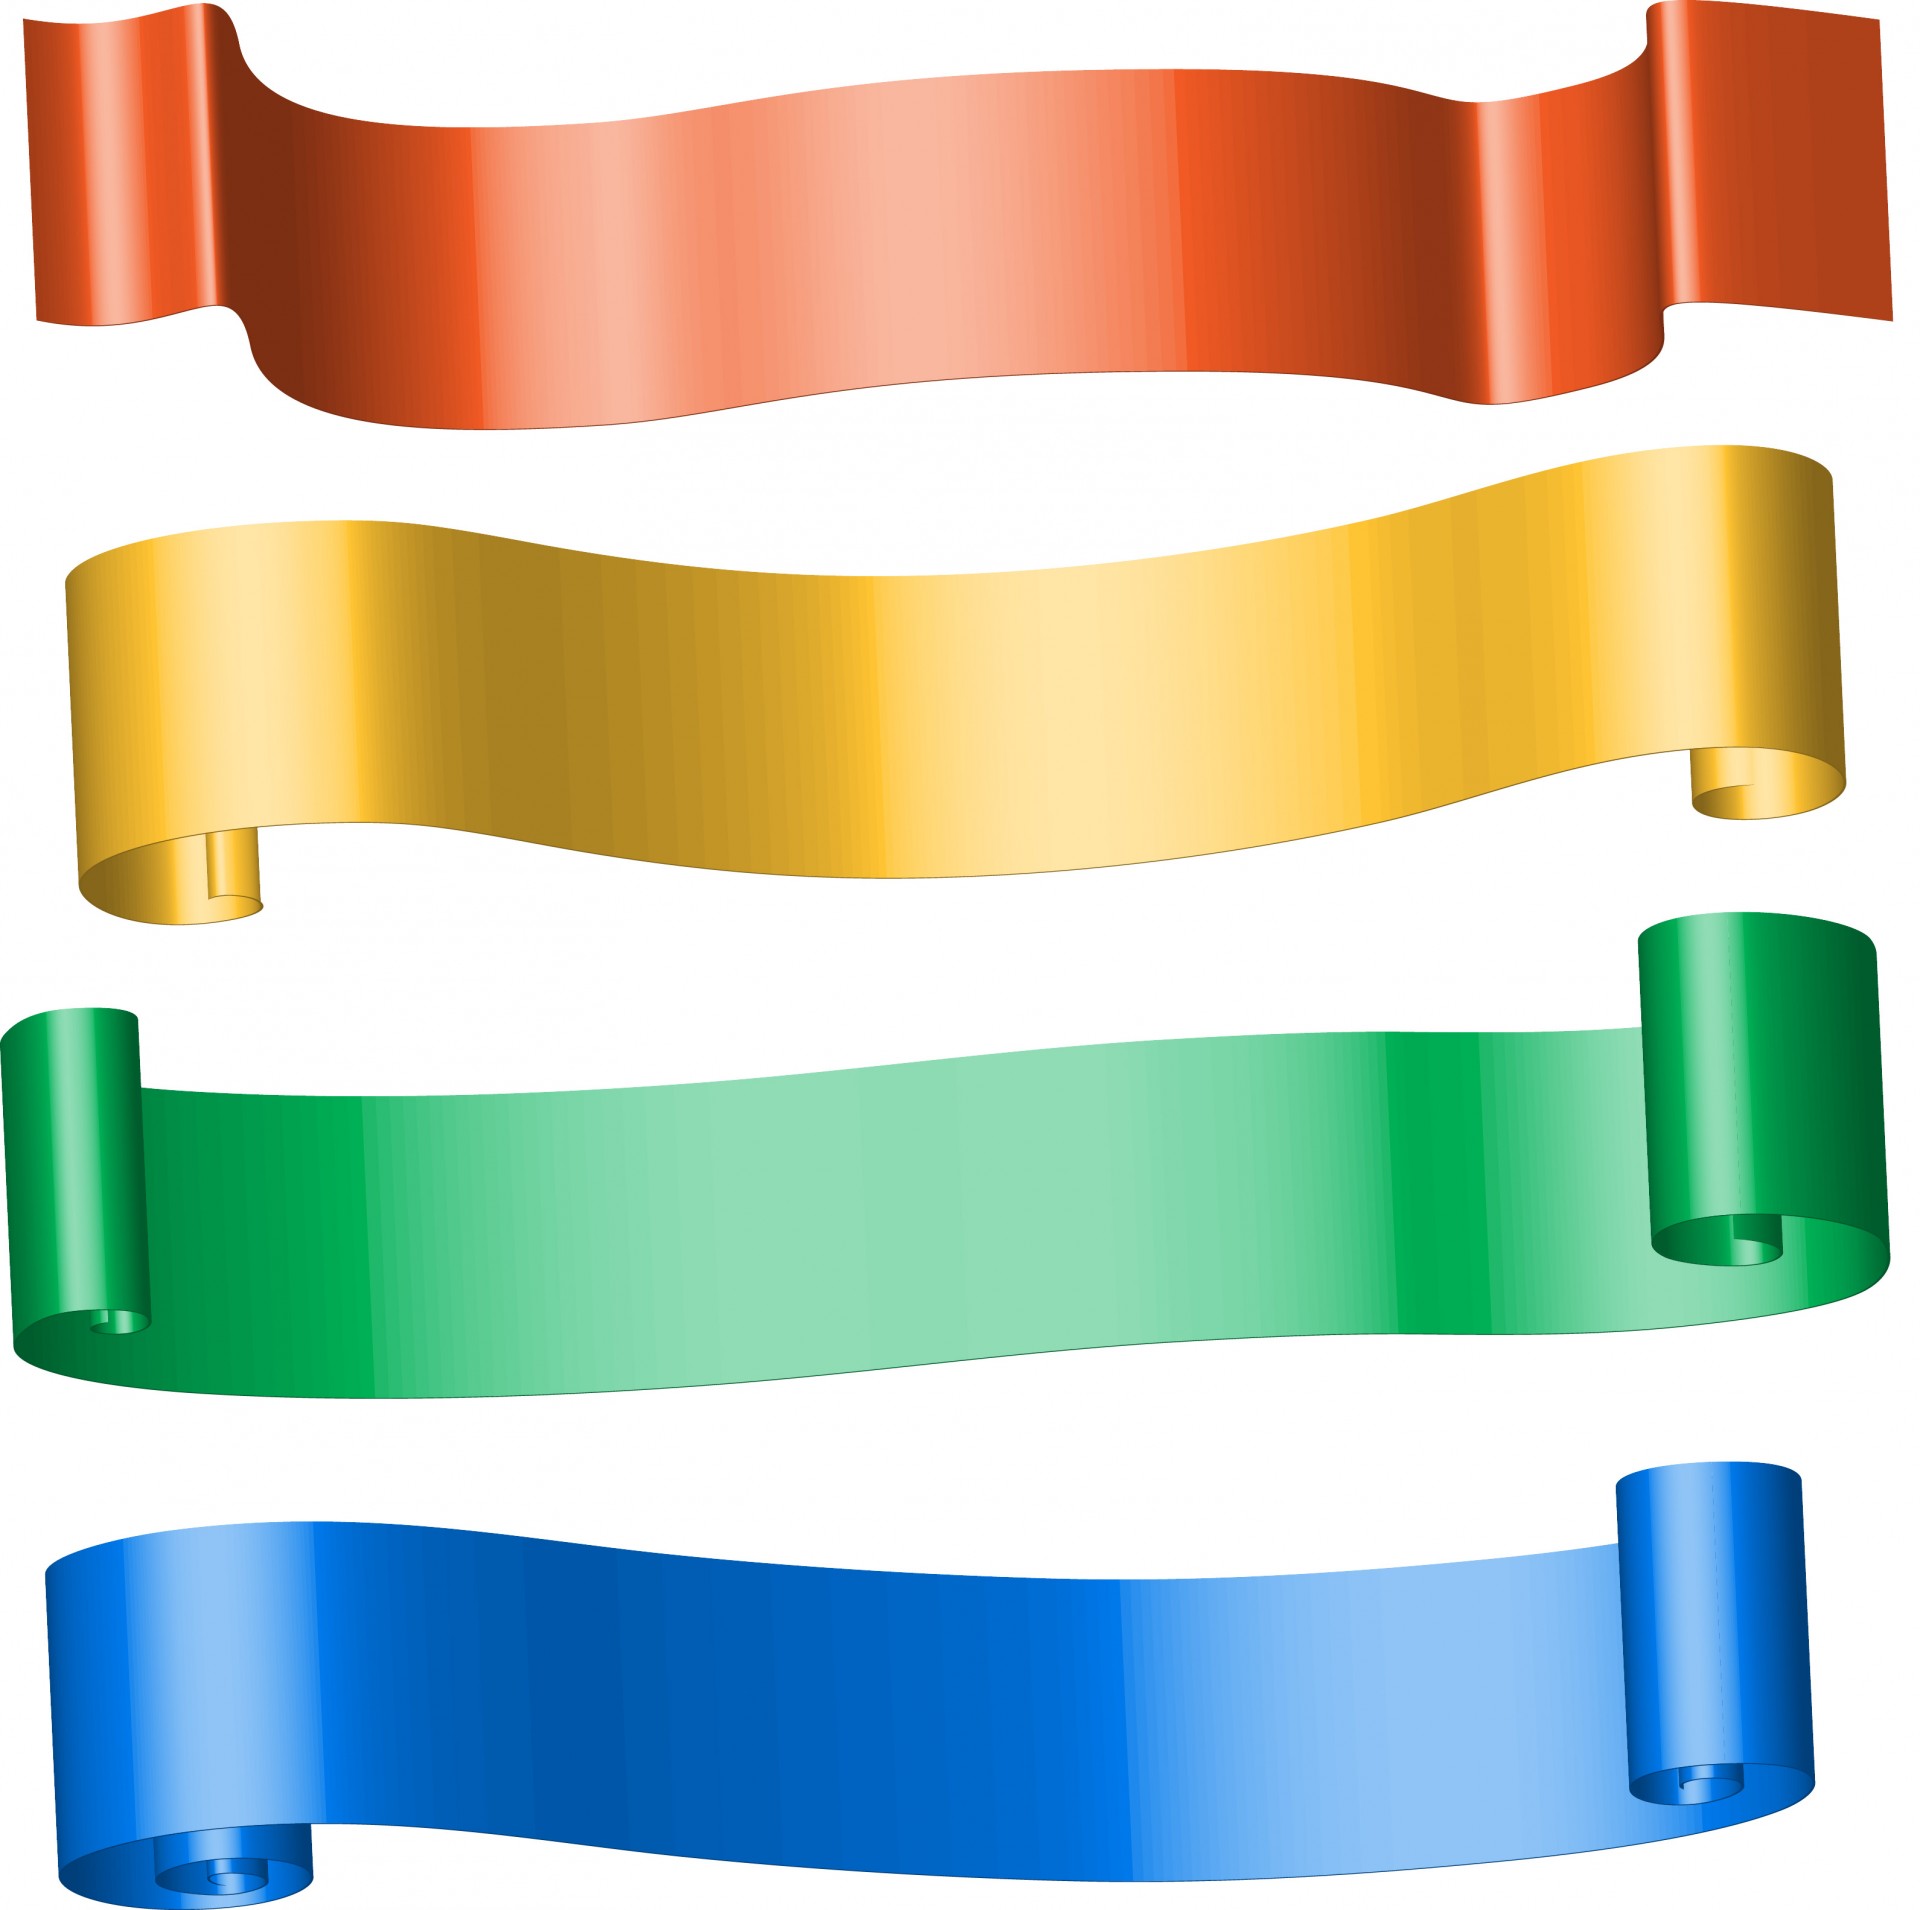 Colour Ribbon Banners Free Stock Photo - Public Domain Pictures